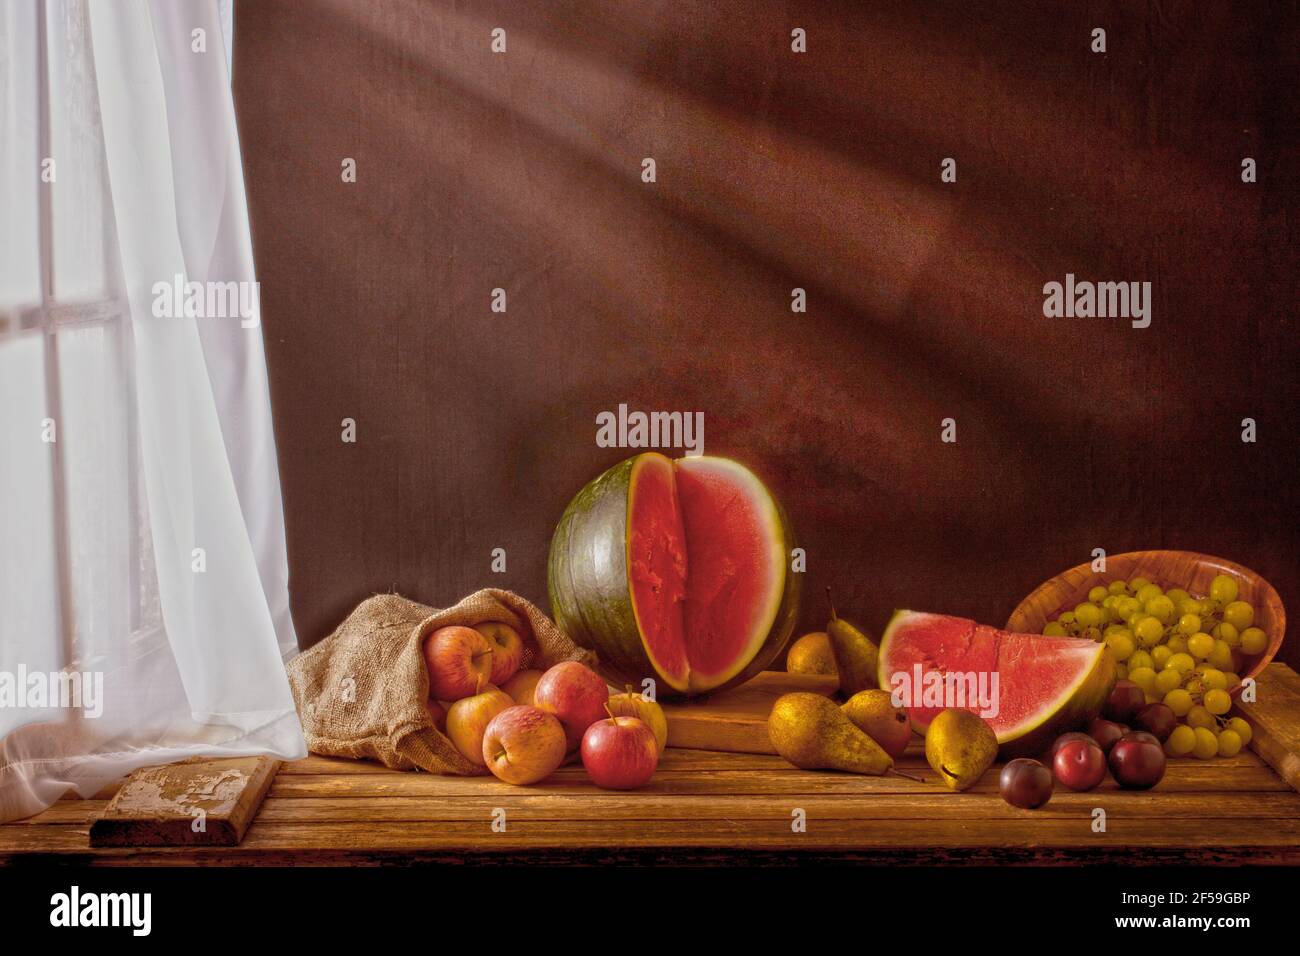 Old style still life grouping of various fruits Stock Photo